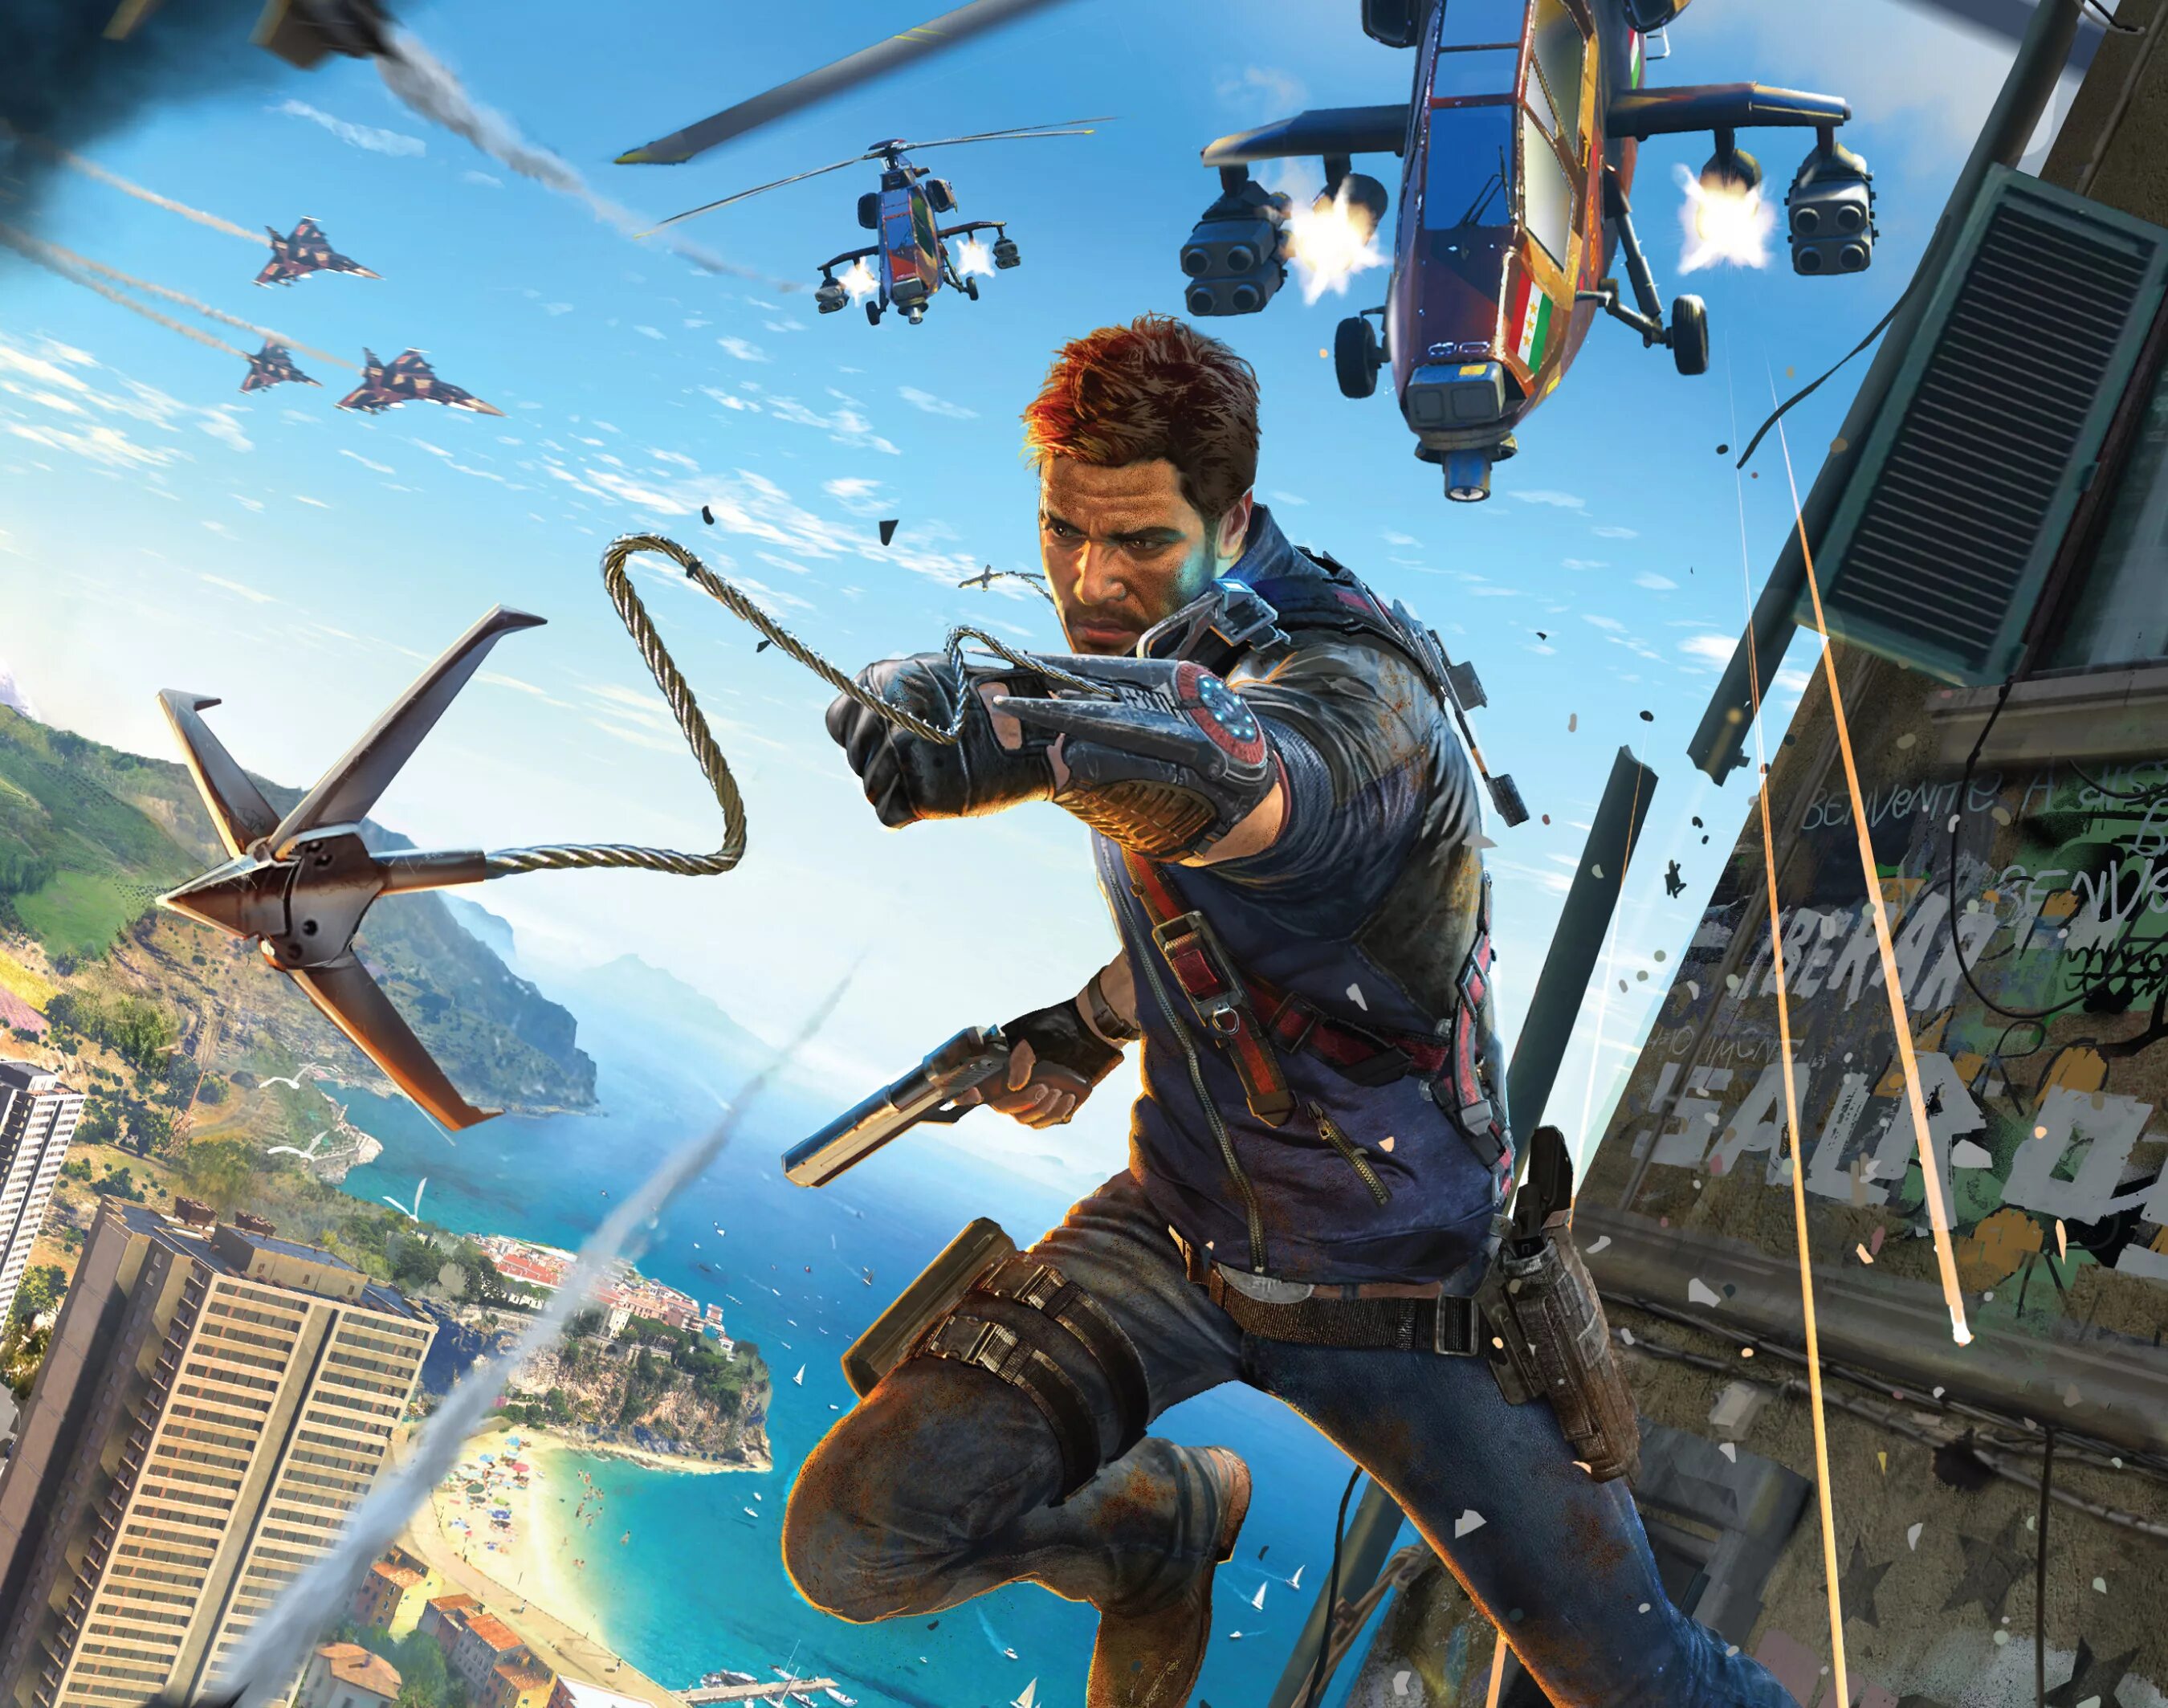 Рико Родригес just cause 3. Рико Родригес just cause 2. Рико Родригес just cause 4. Рико Родригес just cause 1.